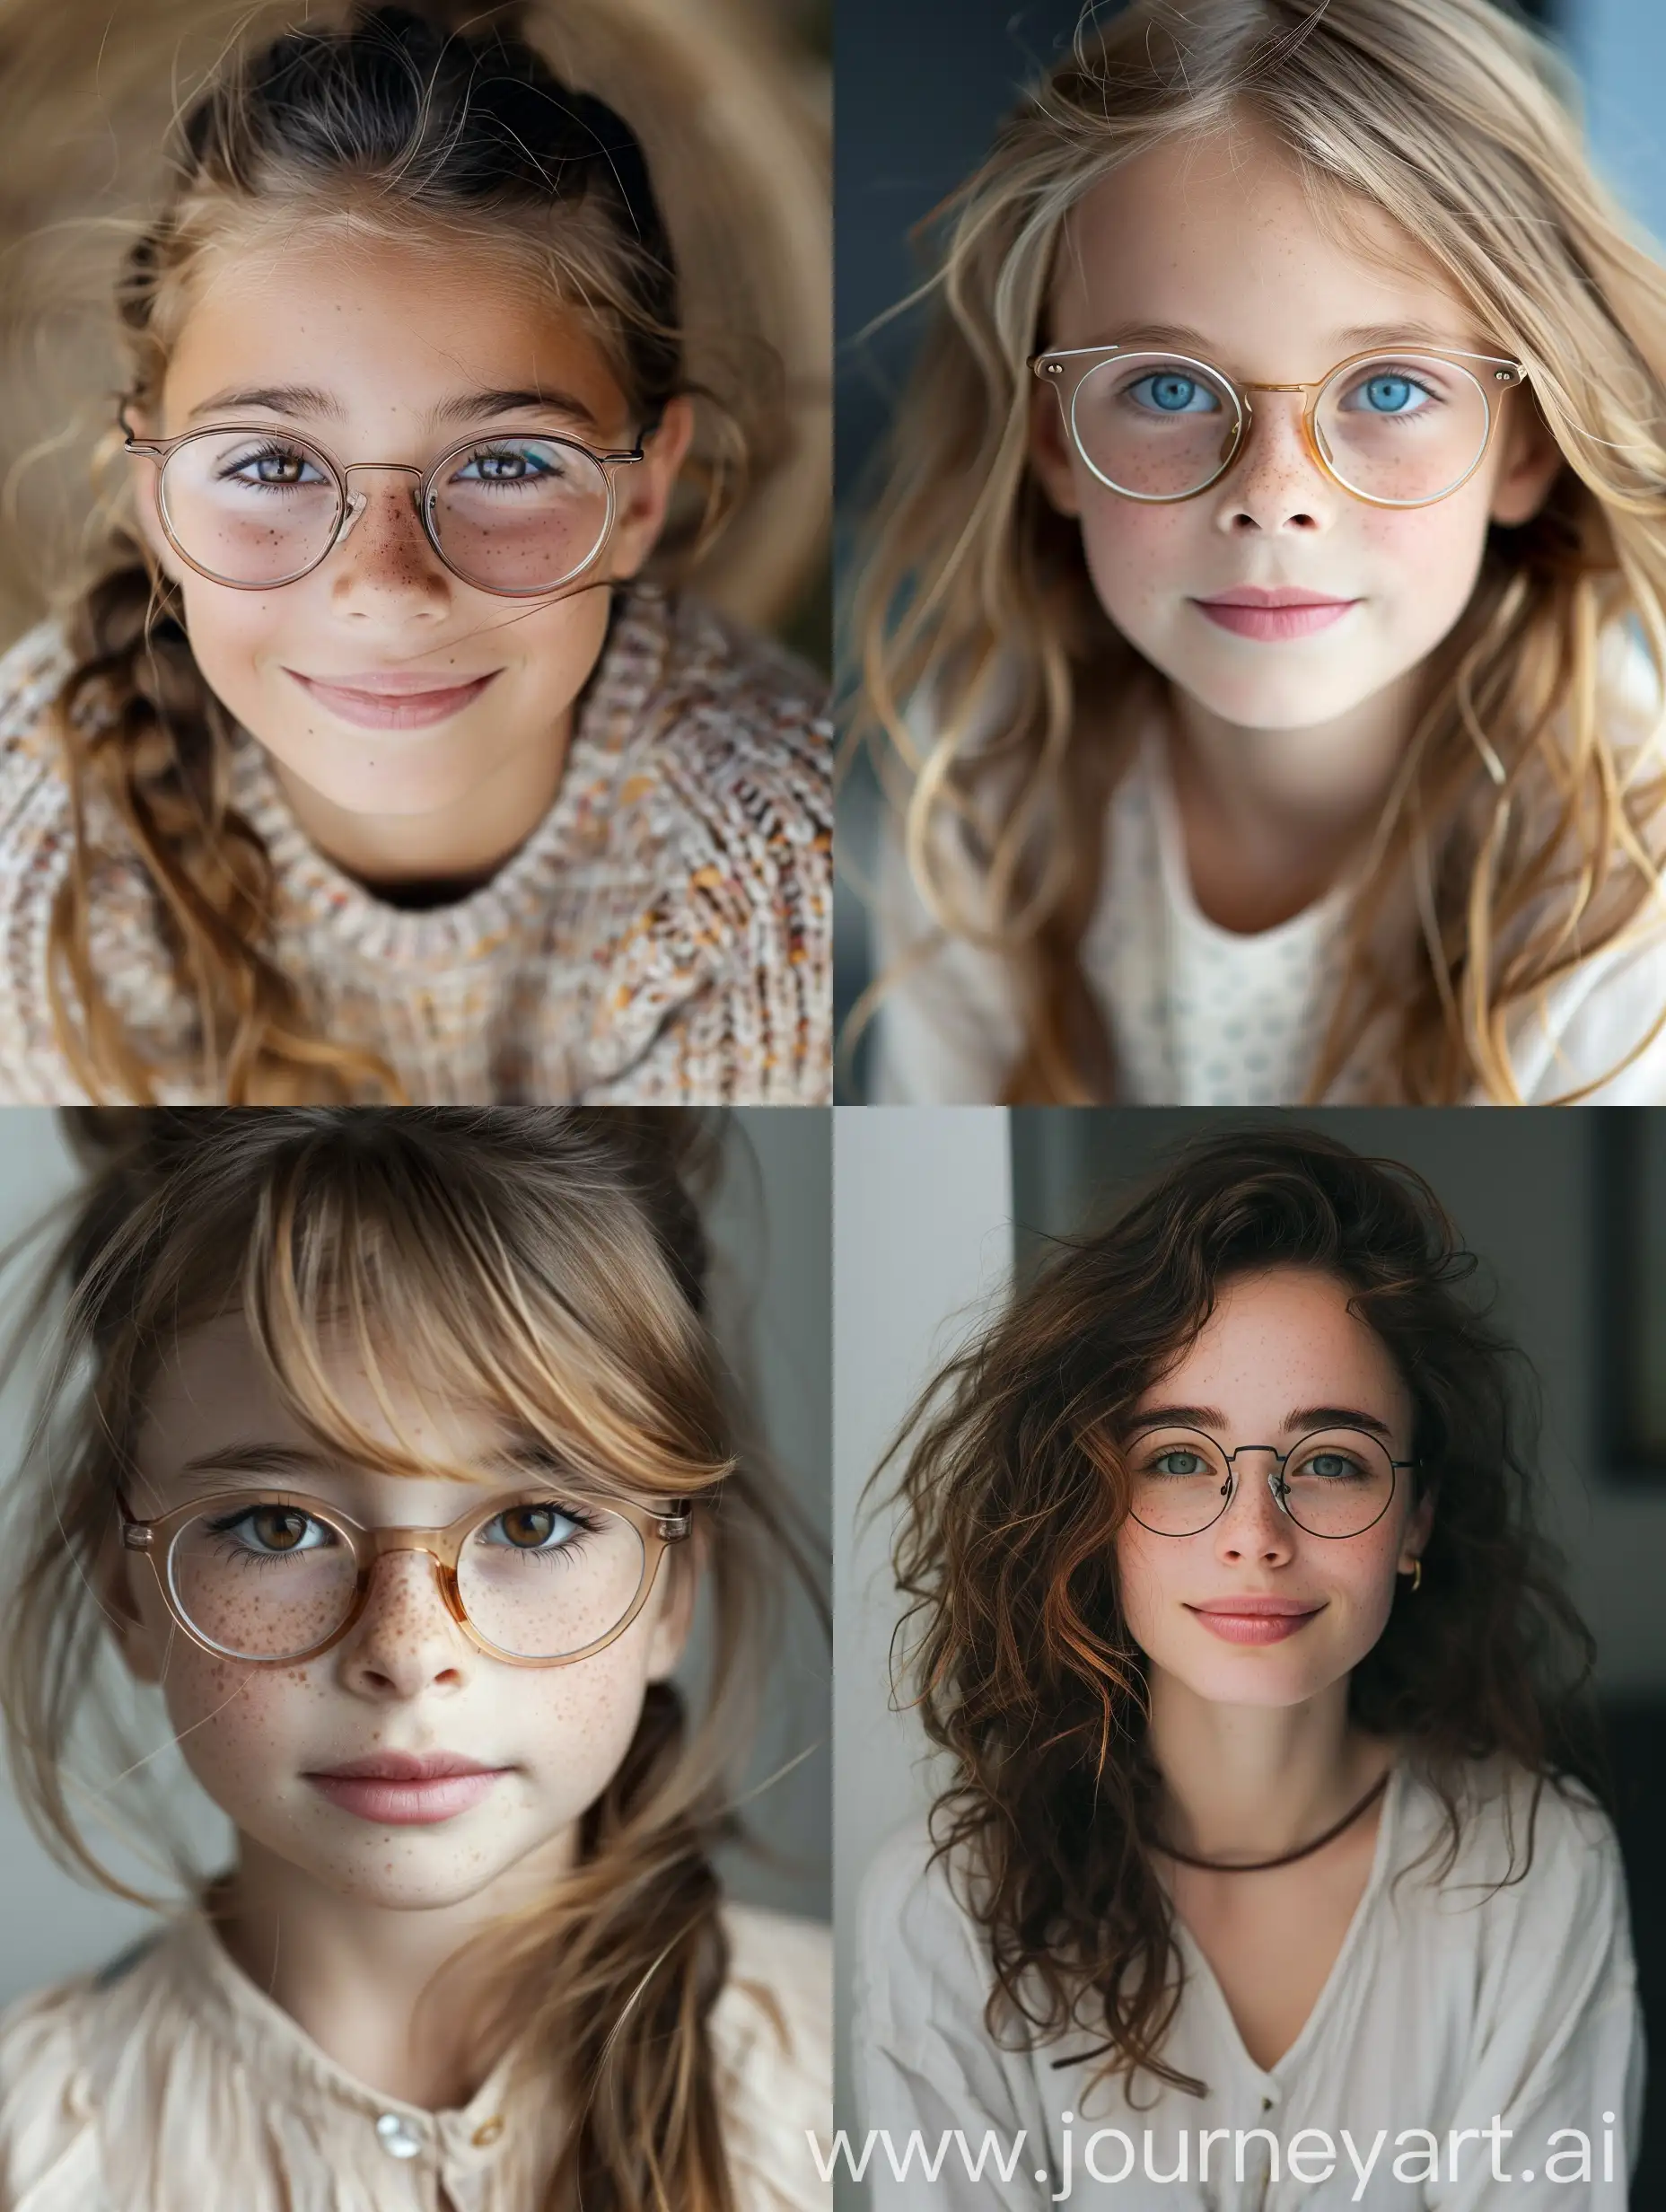 Cheerful-Girl-Wearing-Glasses-Poses-for-Isabelle-Arsenault-Portrait